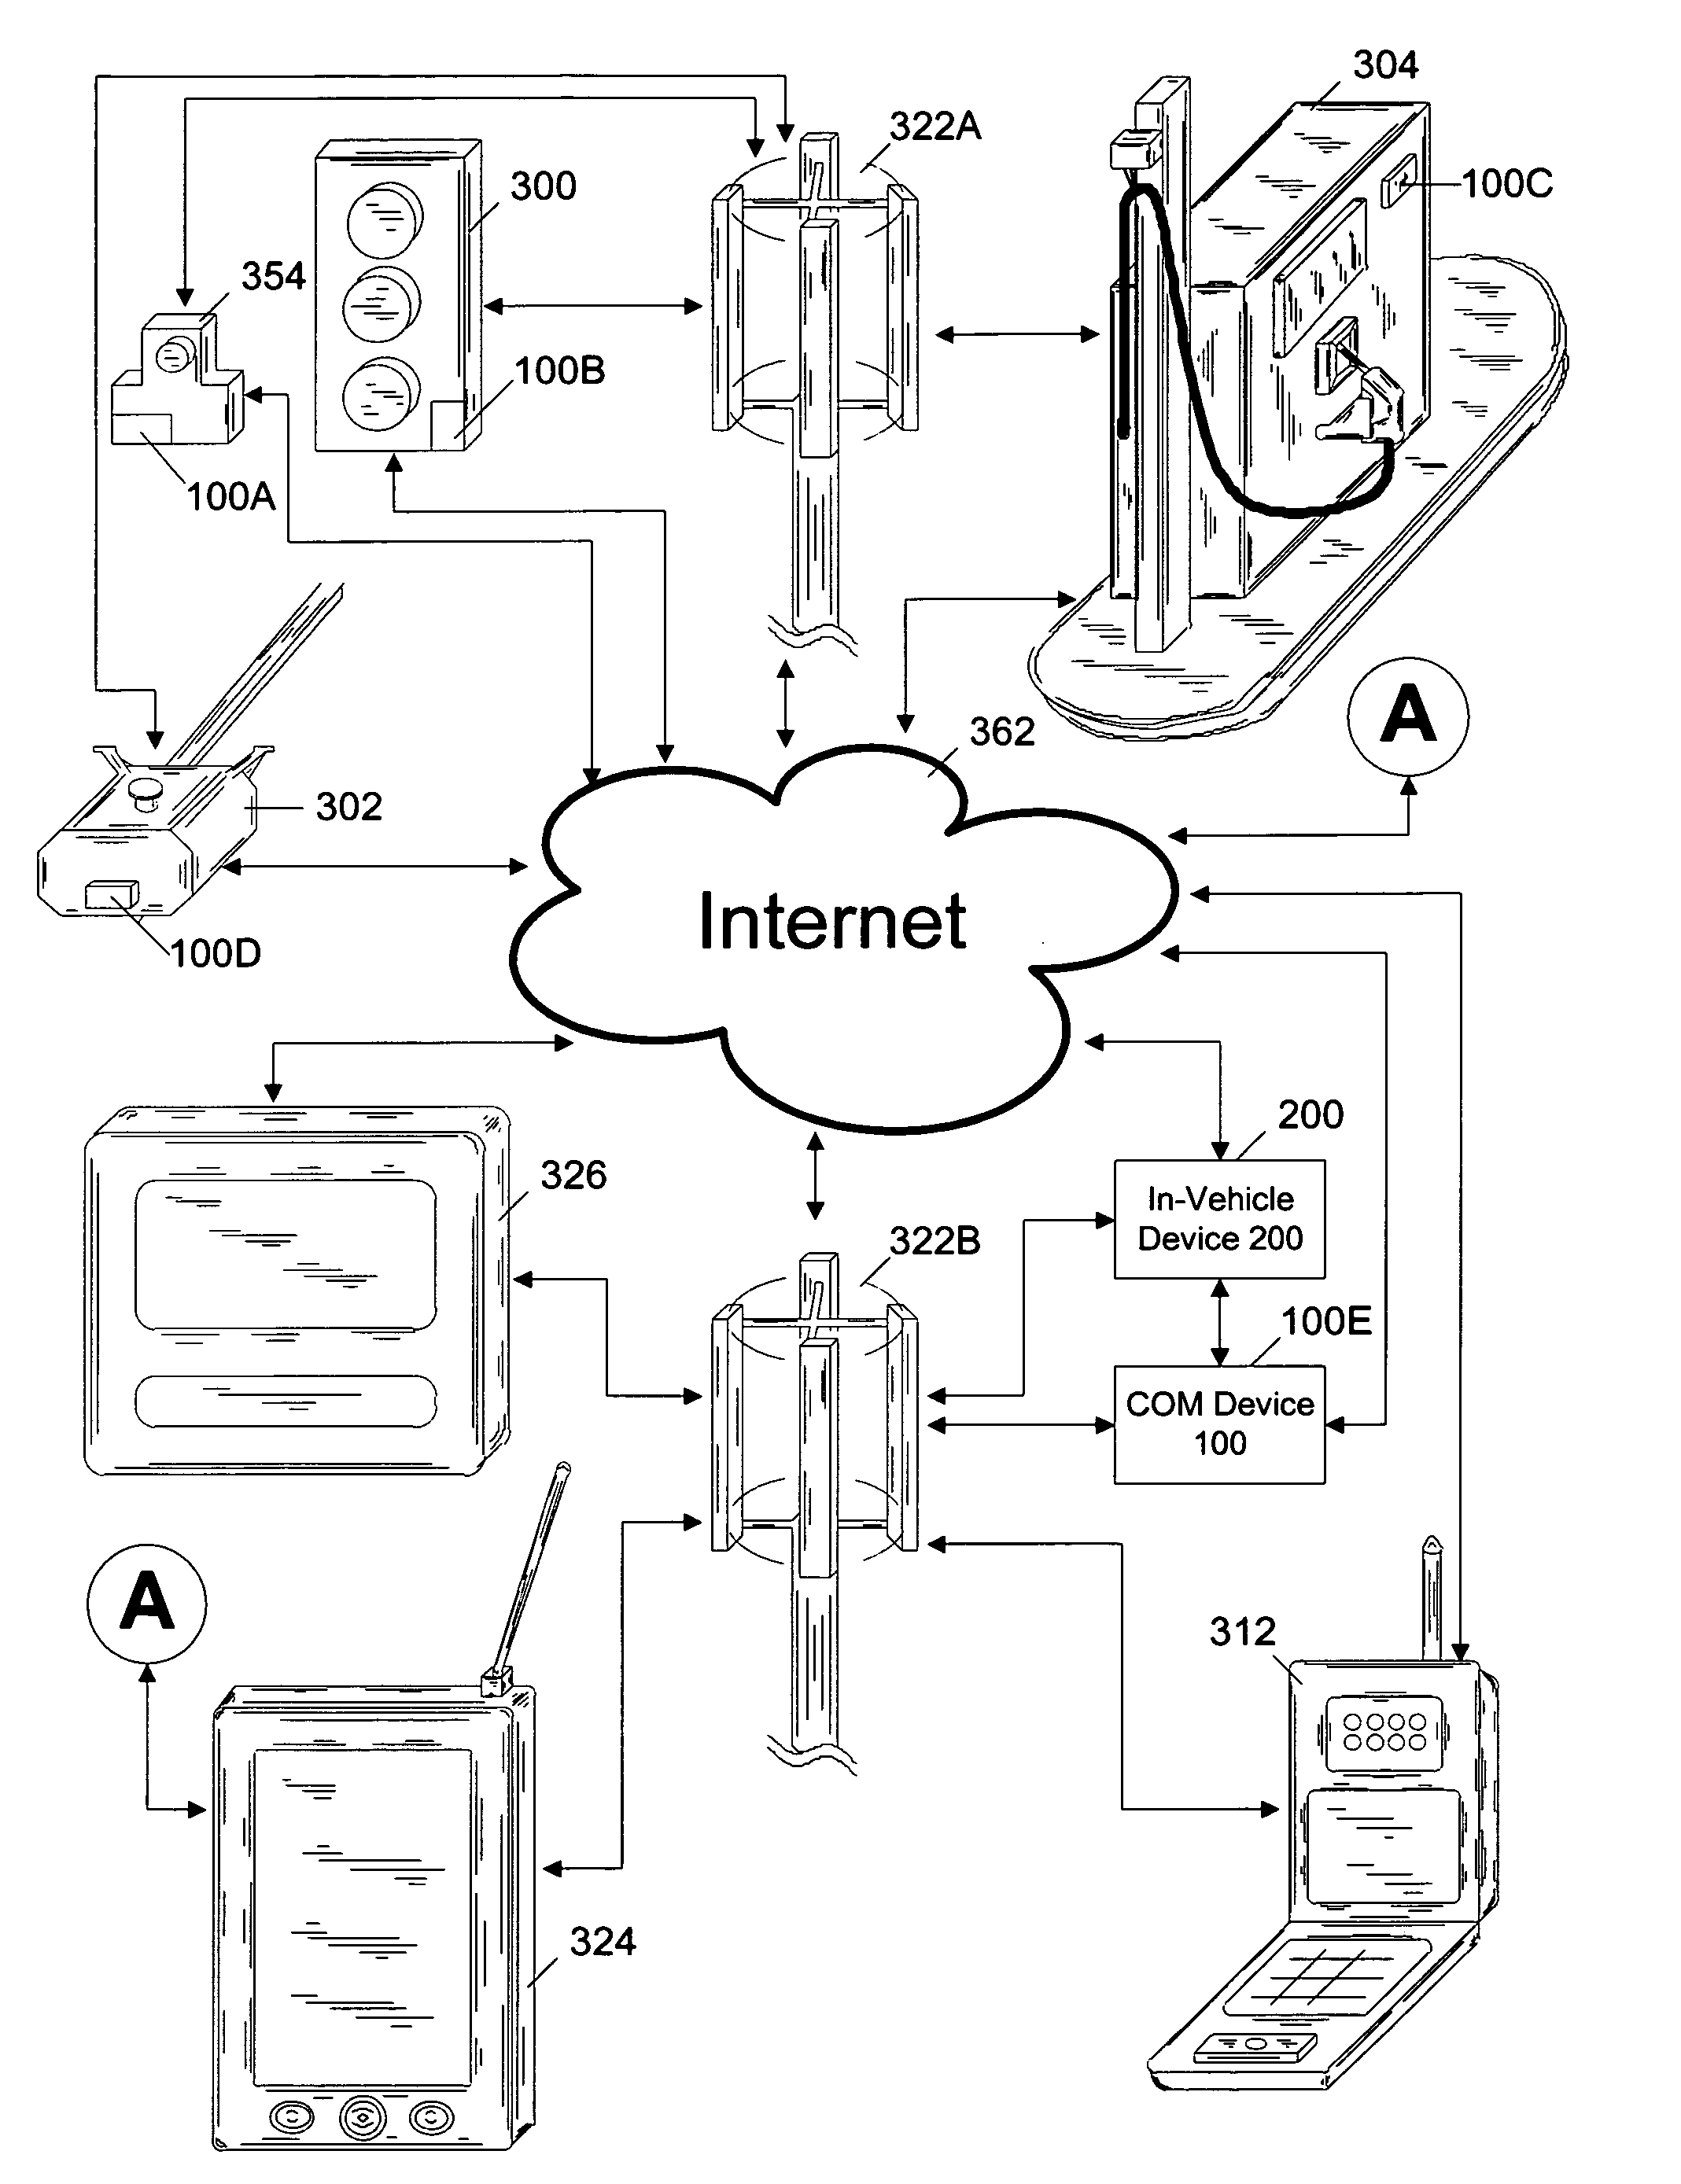 Communication interface device for managing wireless data transmission between a vehicle and the internet